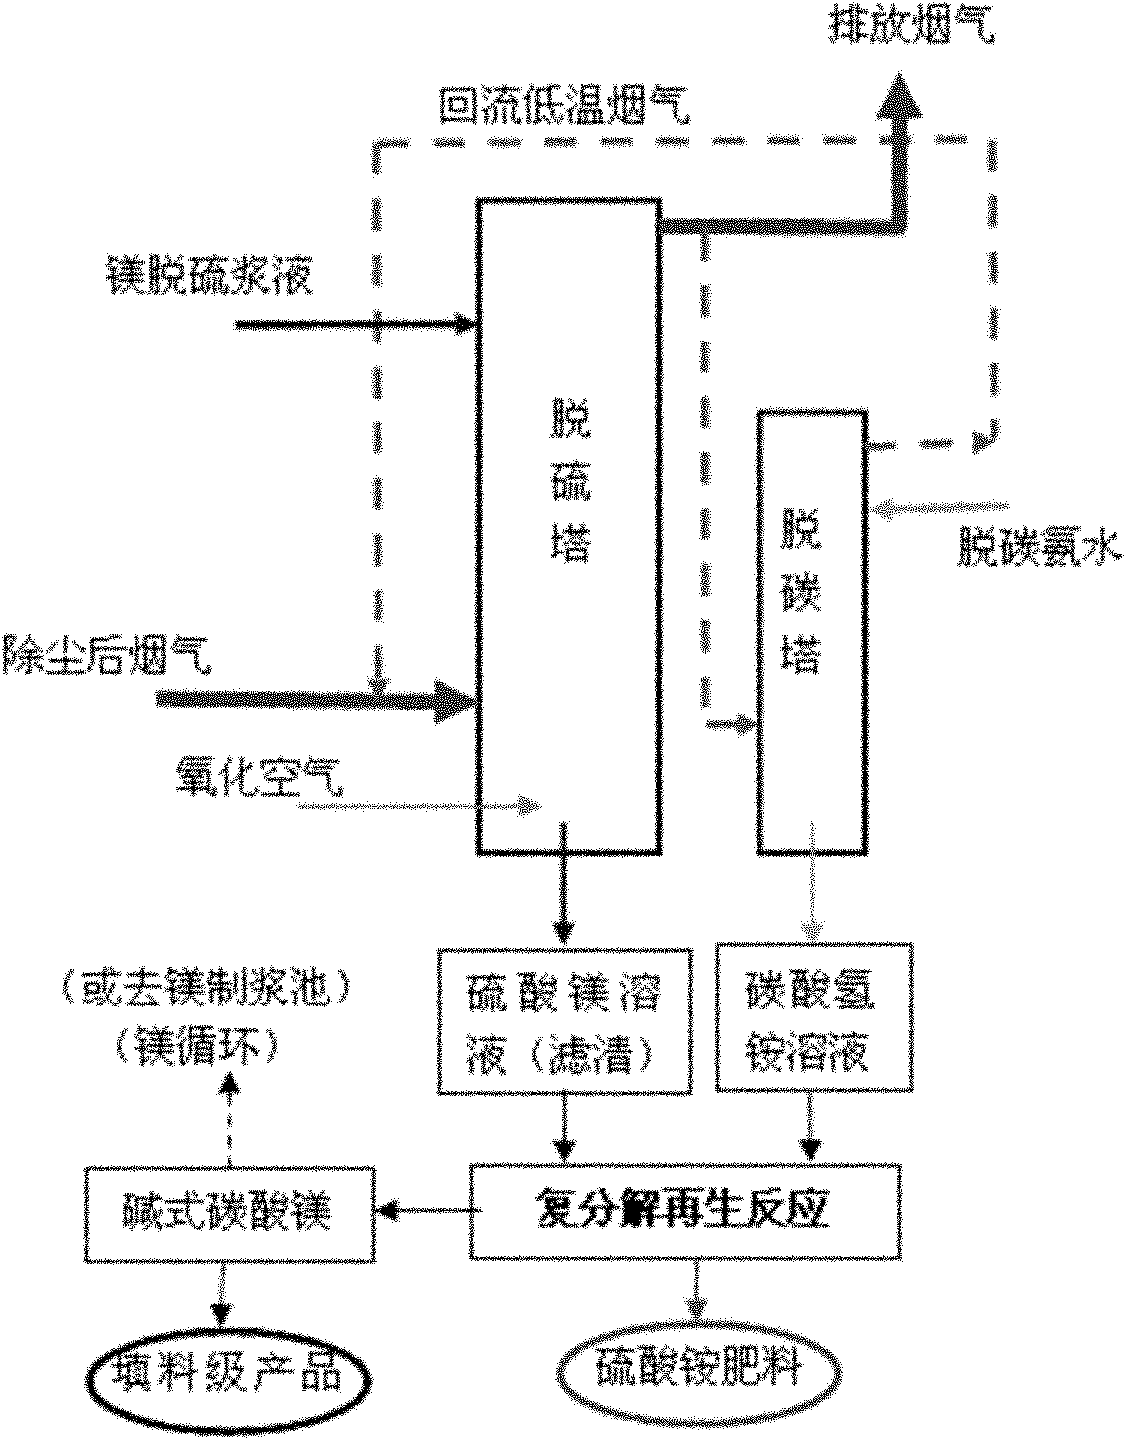 Method for implementing magnesium-ammonia combined flue gas desulfuration and decarbonization and by-product recovery